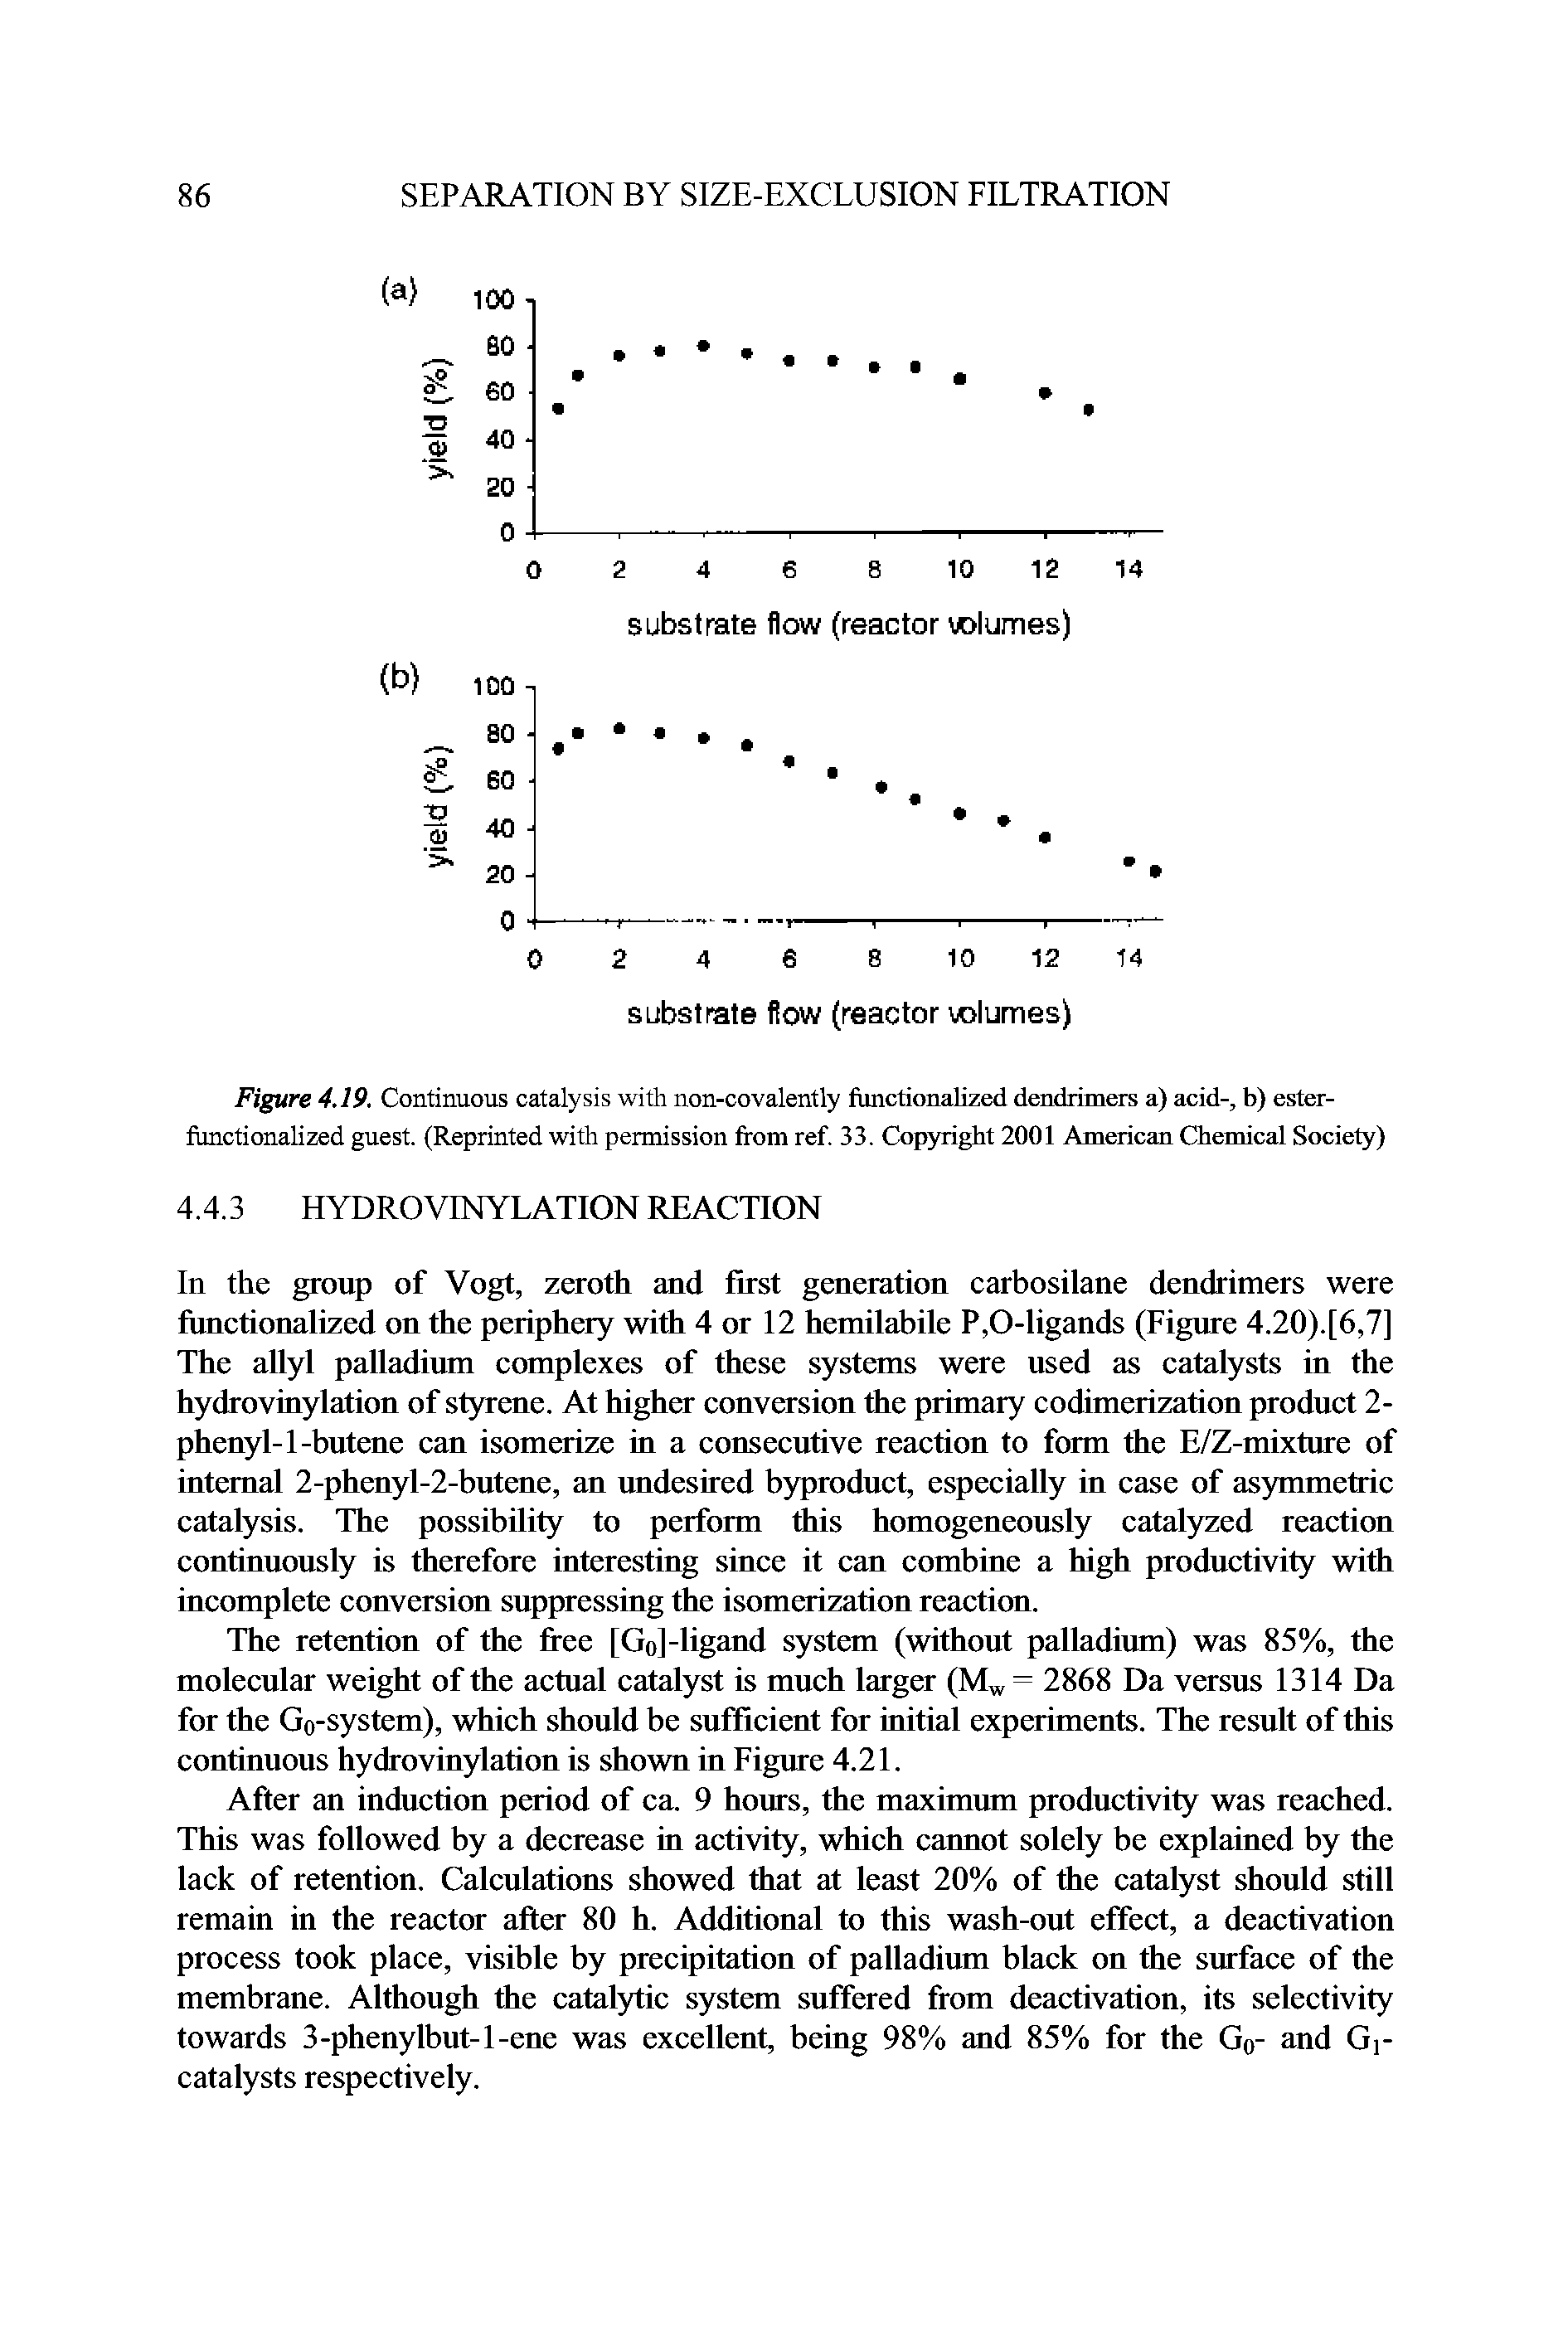 Figure 4.19. Continuous catalysis with non-covalently functionalized dendrimers a) acid-, b) ester-functionalized guest. (Reprinted with permission from ref. 33. Copyright 2001 American Chemical Society)...